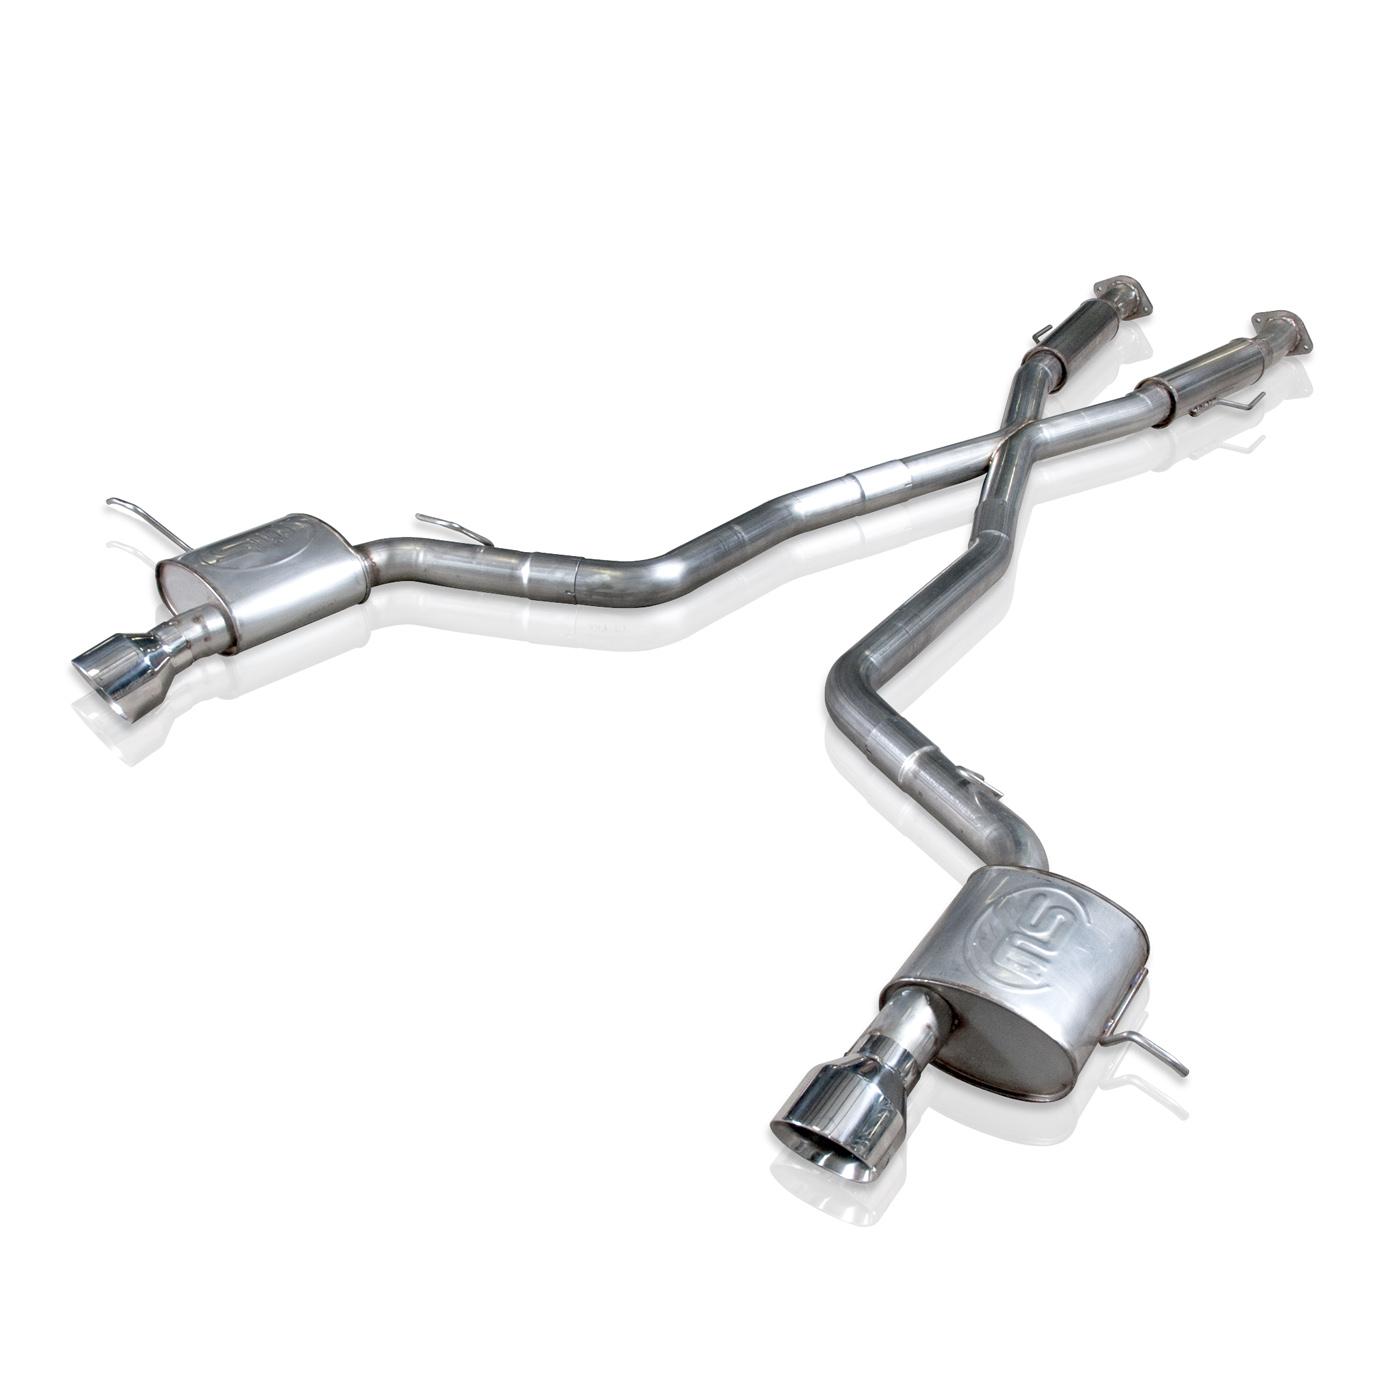 2012+ Jeep SRT8 Stainless Works Dual S-Tube Exhaust System w/Turbo Mufflers & Xpipe